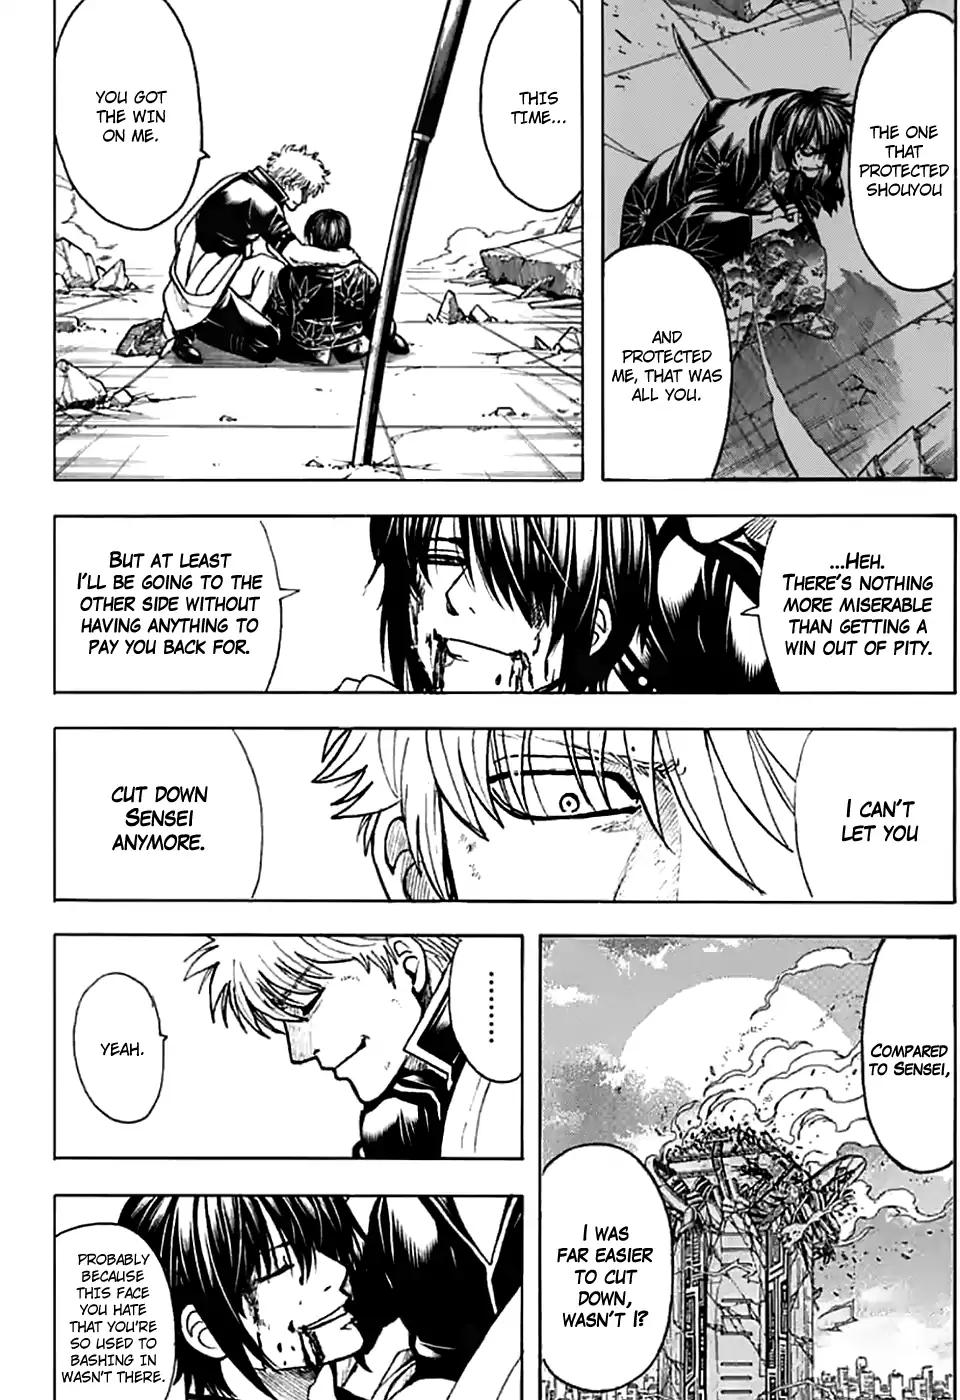 Gintama chapter 703 page 35